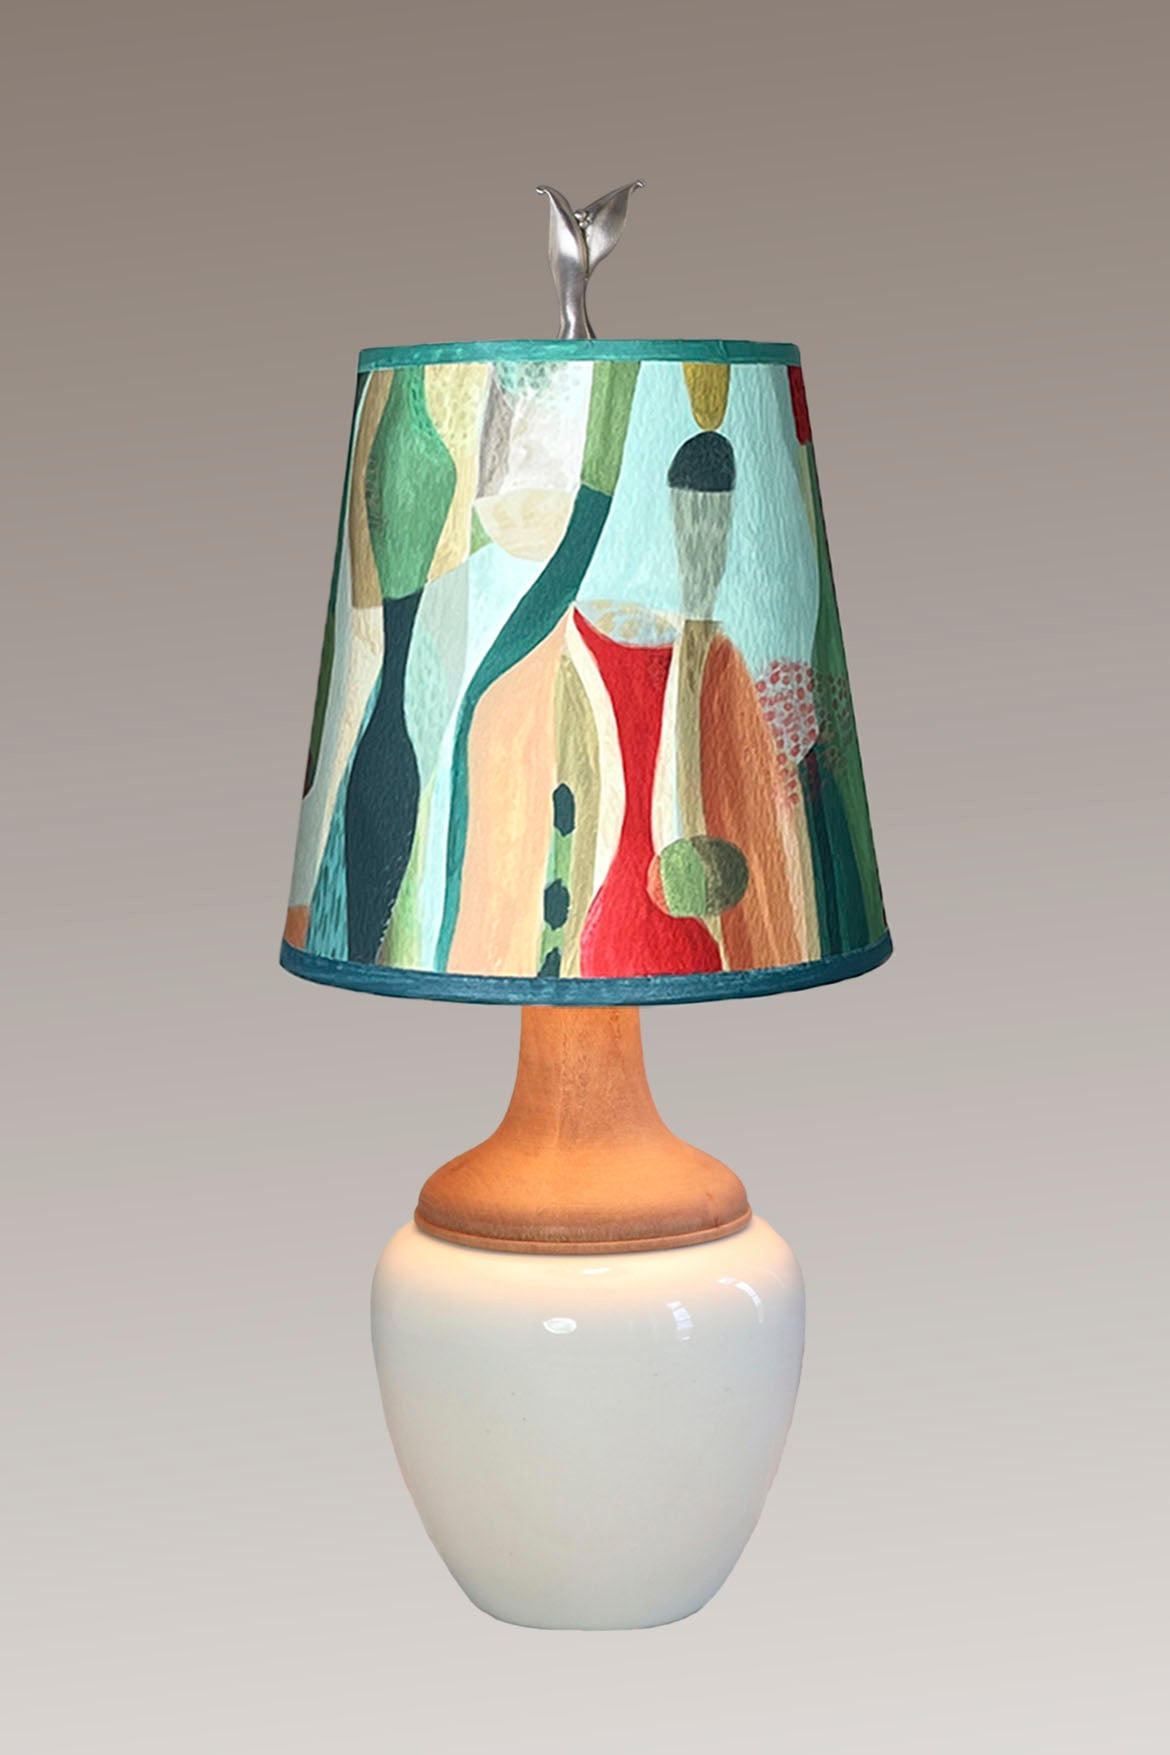 Janna Ugone & Co Table Lamp Ceramic and Maple Table Lamp in Ivory Gloss with Small Drum Shade in Riviera in Poppy